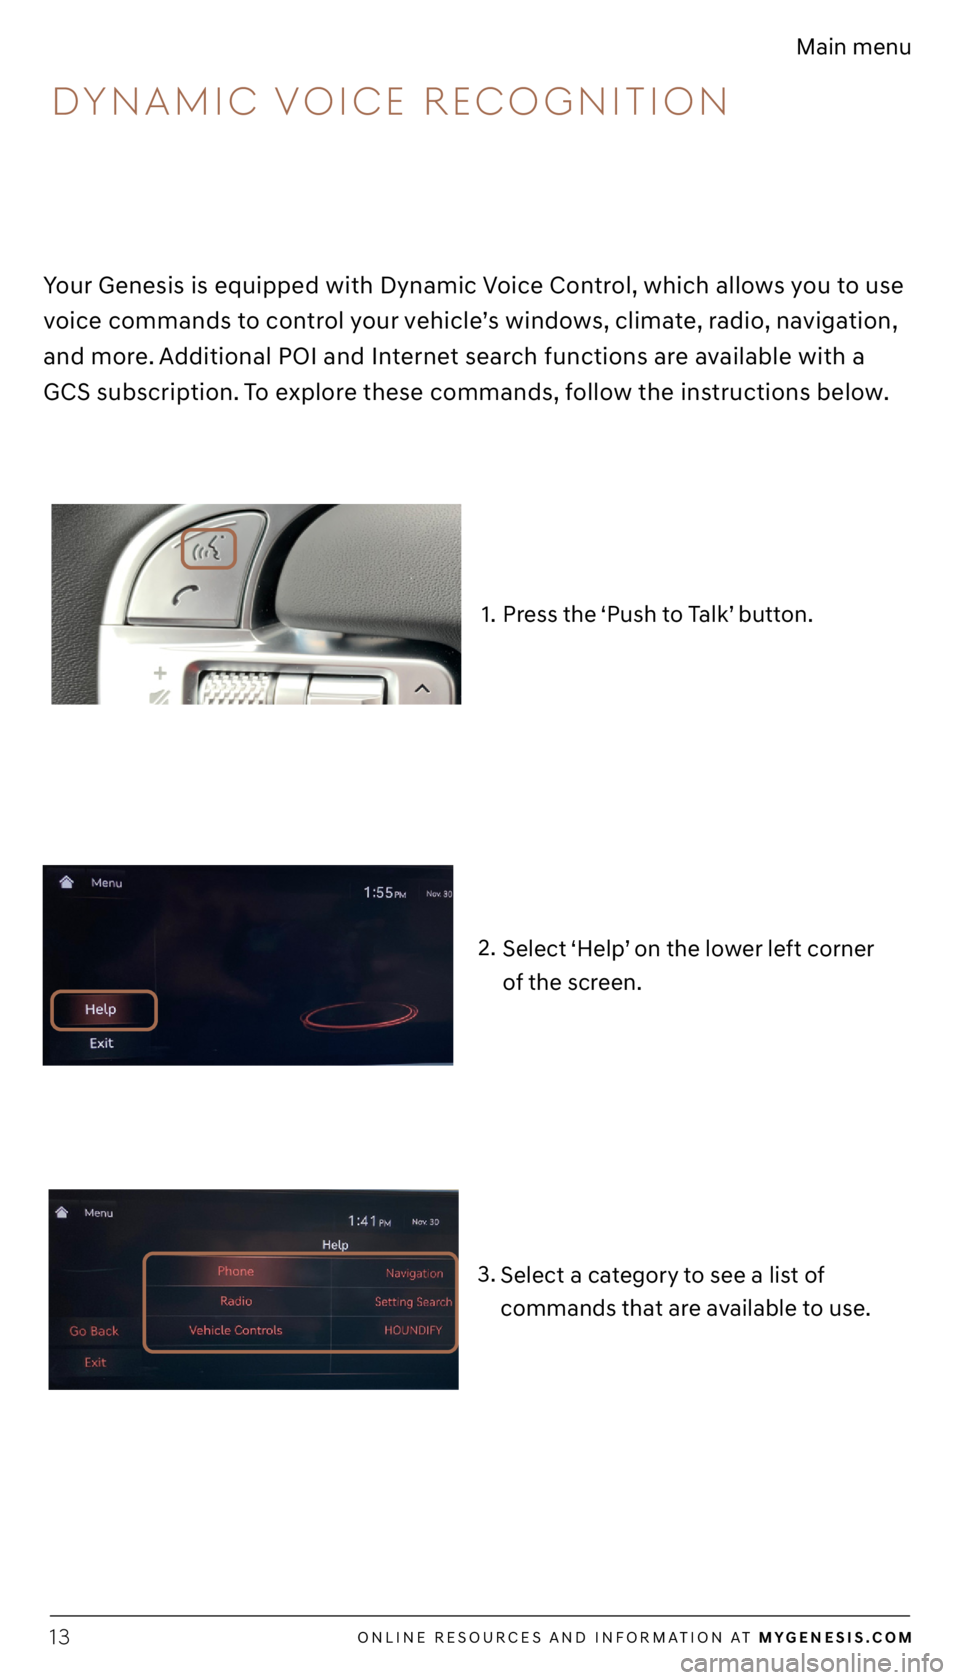 GENESIS G80 2021  Getting Started Guide ONLINE RESOURCES AND INFORMATION AT MYGENESIS.COM13
Main menu
Select a category to see a list of 
commands that are available to use.3. Press the ‘Push to Talk’ button. 
Select ‘Help’ on the l